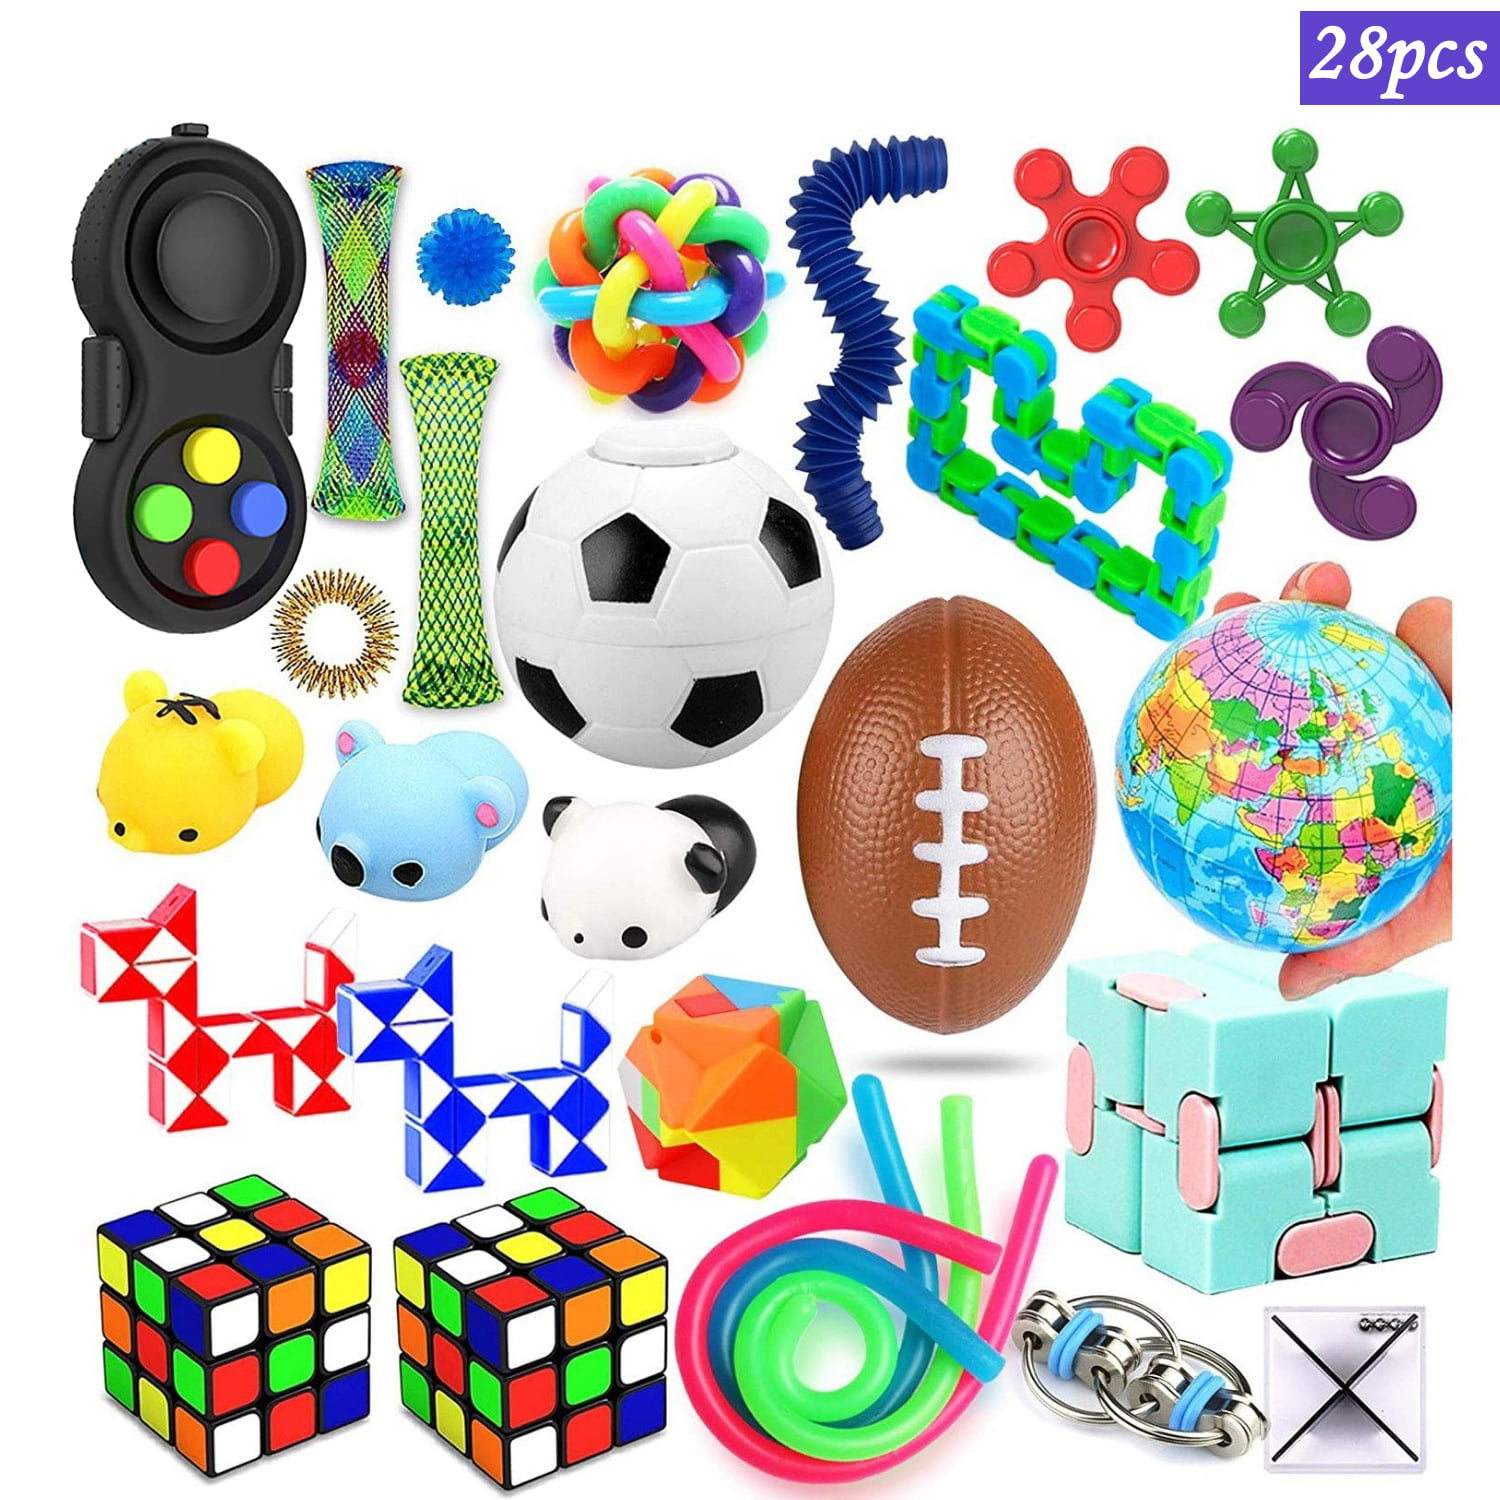 Details about   Fidget Sensory Toy Set 1-66 Pack For ADHD Stress Relief Anti-Anxiety Kids Adults 